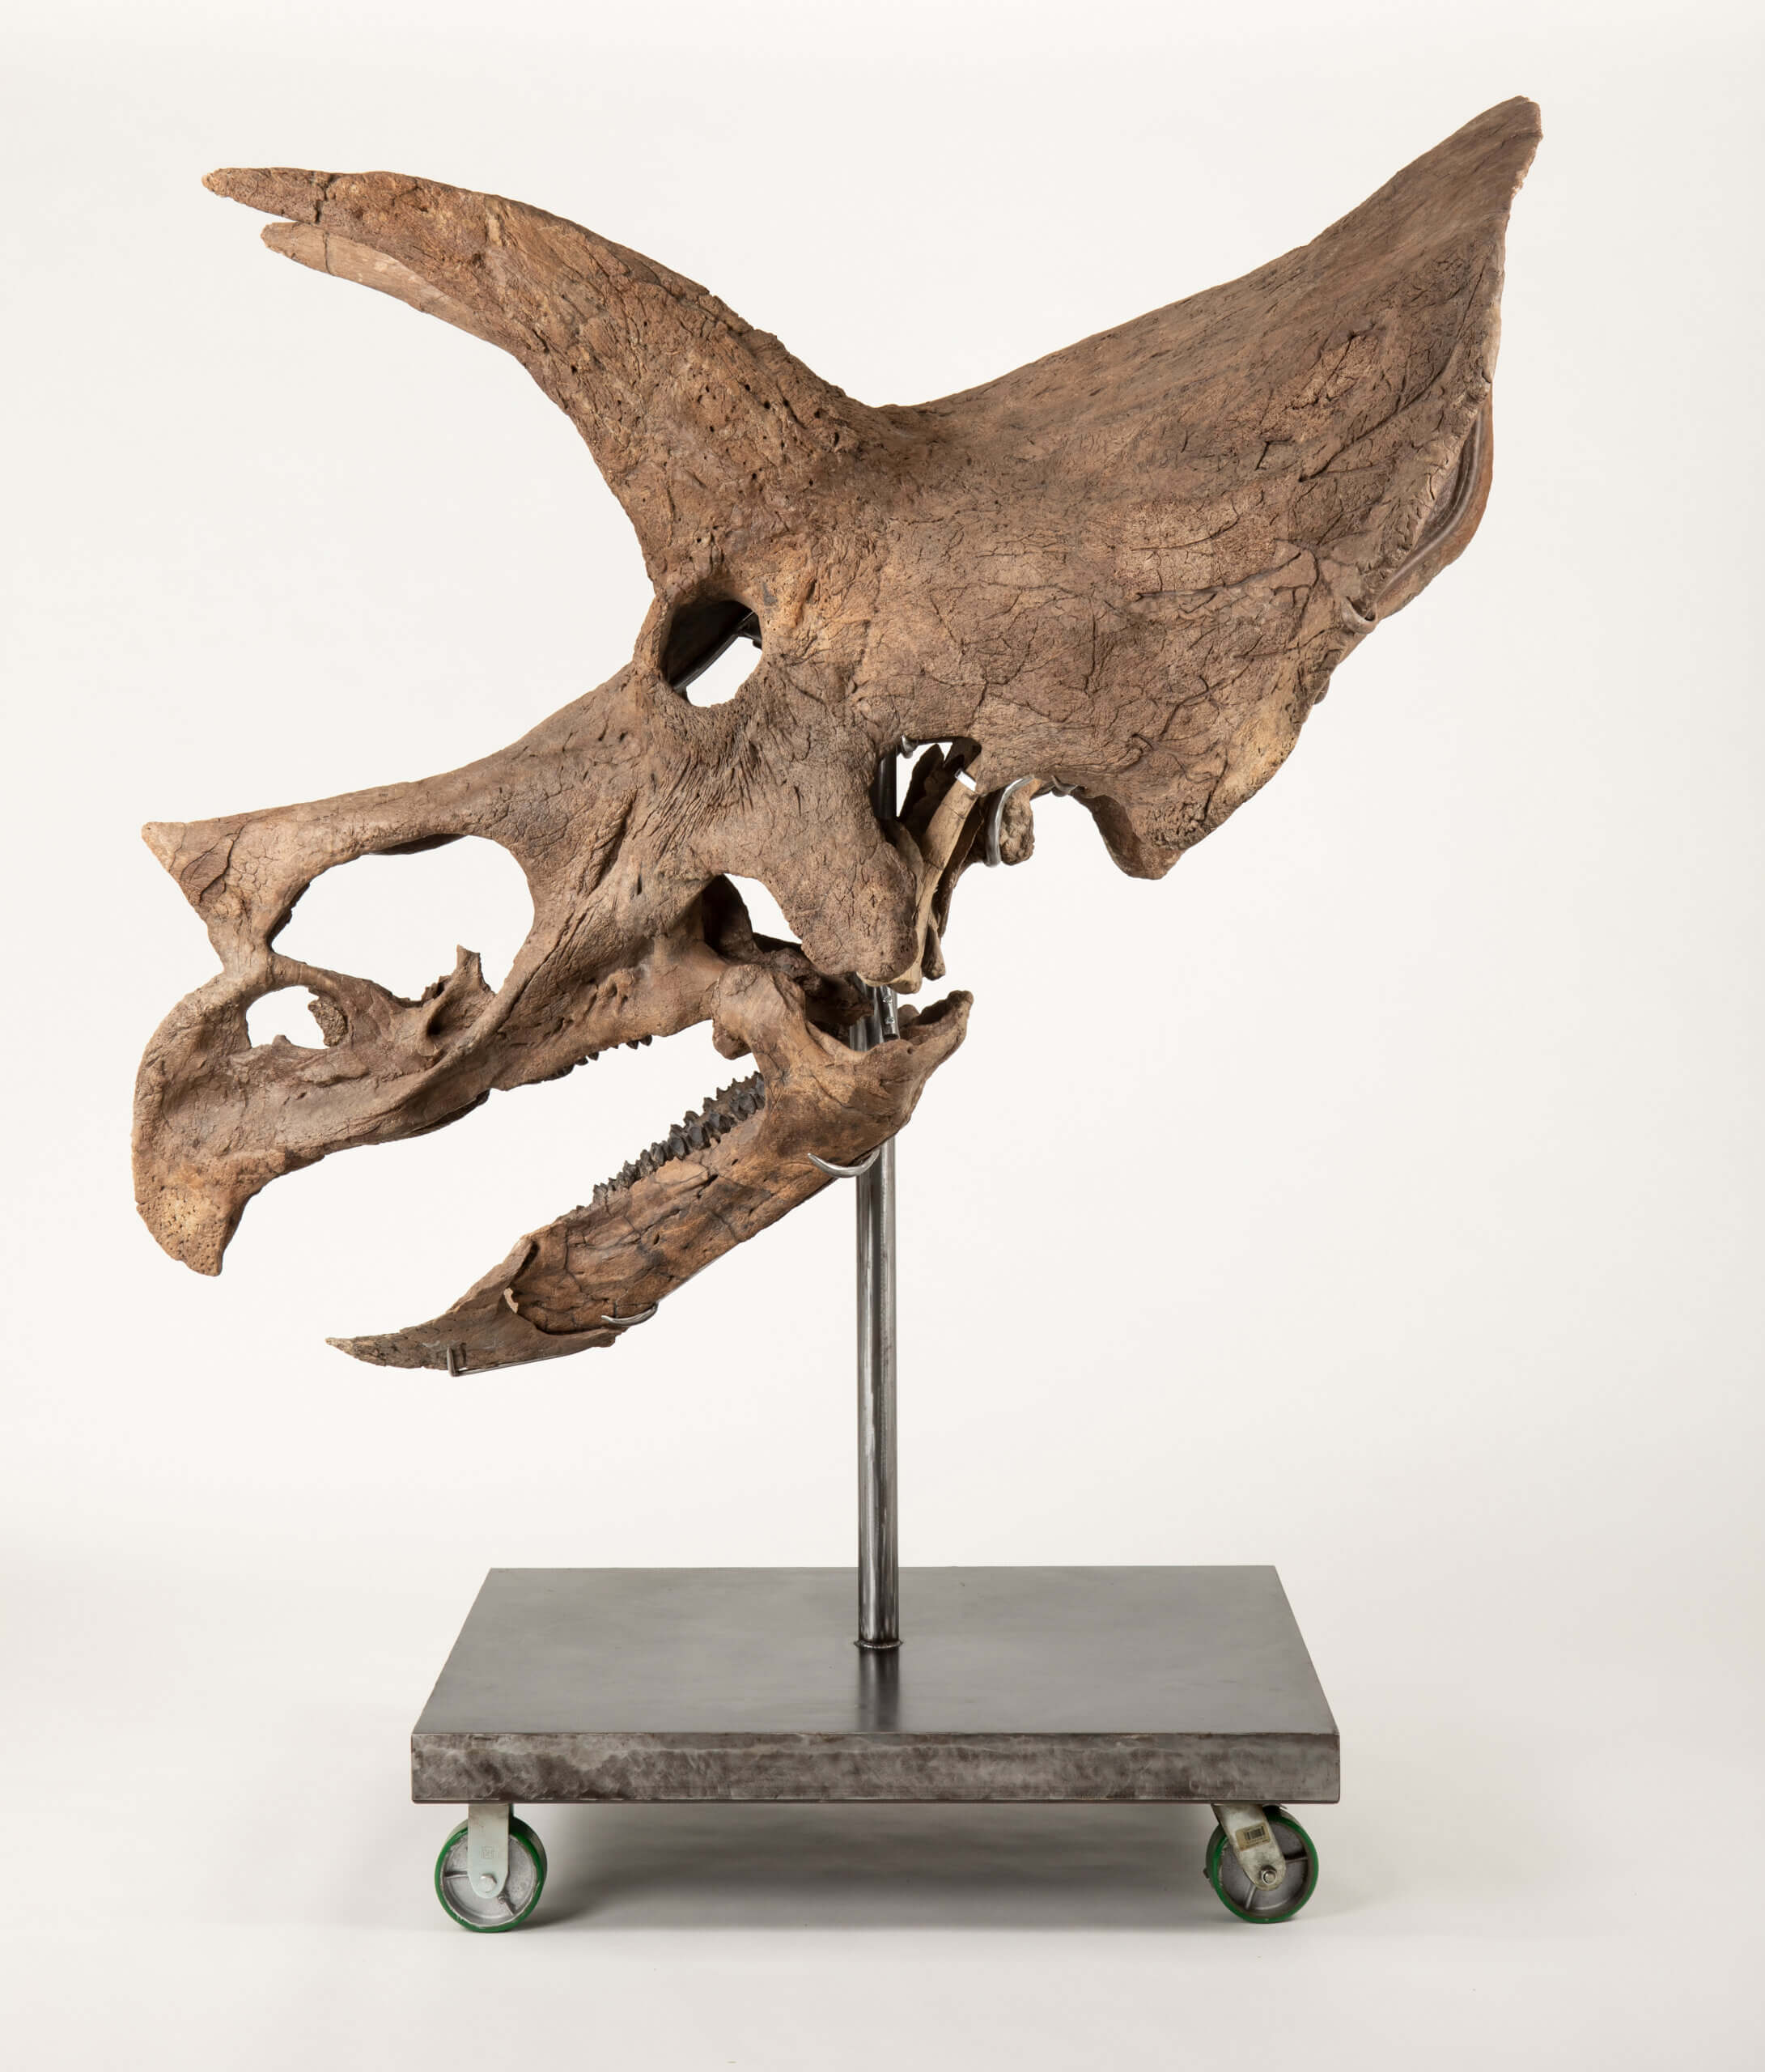 Rally's Deaton Triceratops skull